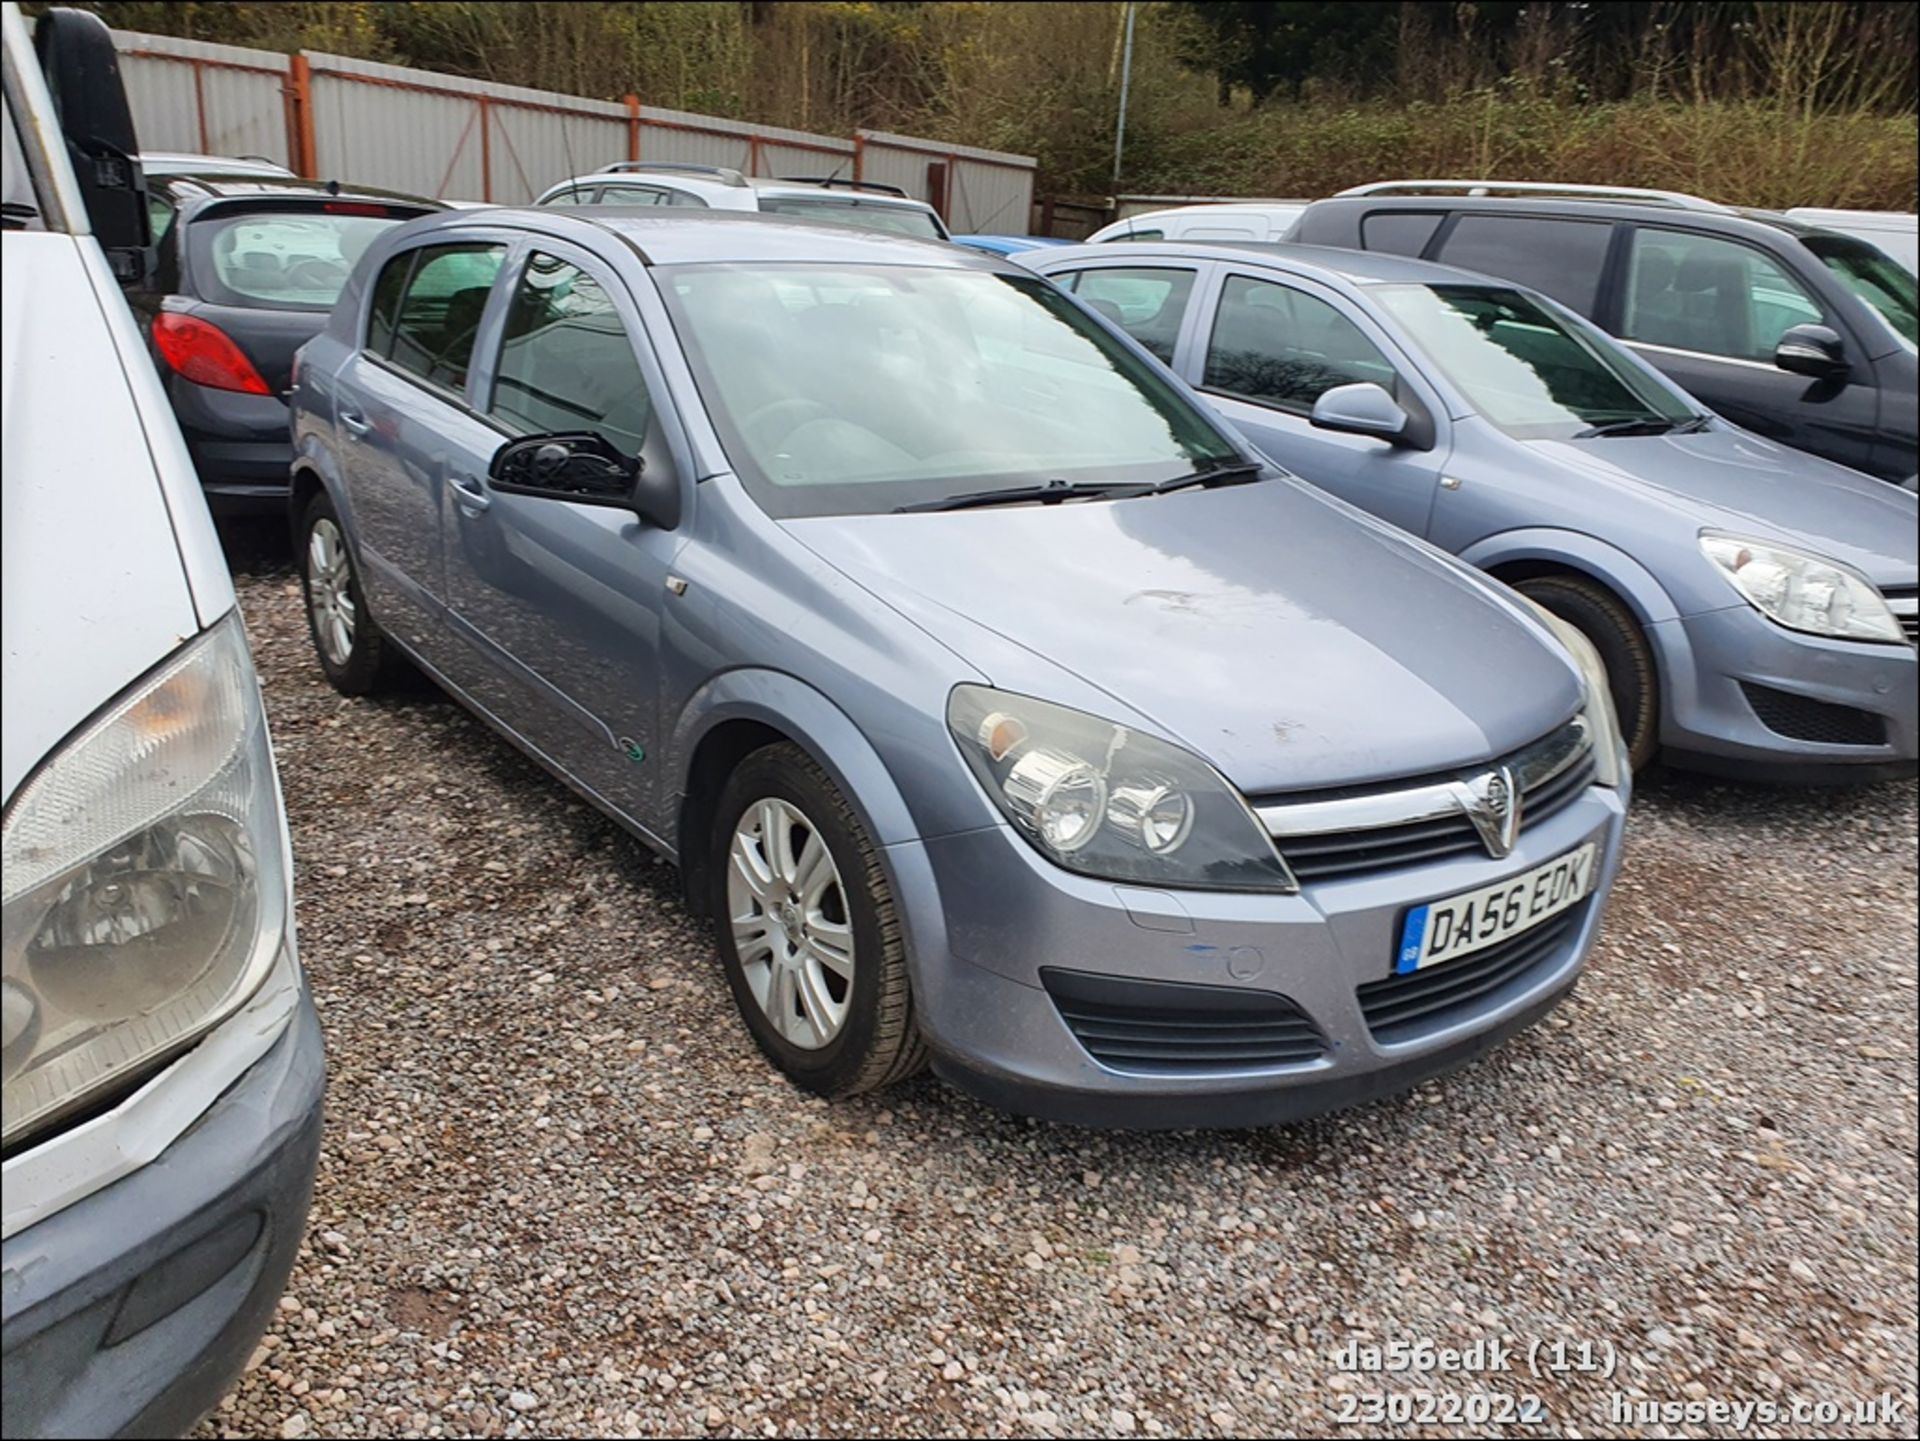 06/56 VAUXHALL ASTRA ACTIVE - 1598cc 5dr Hatchback (Silver) - Image 12 of 42